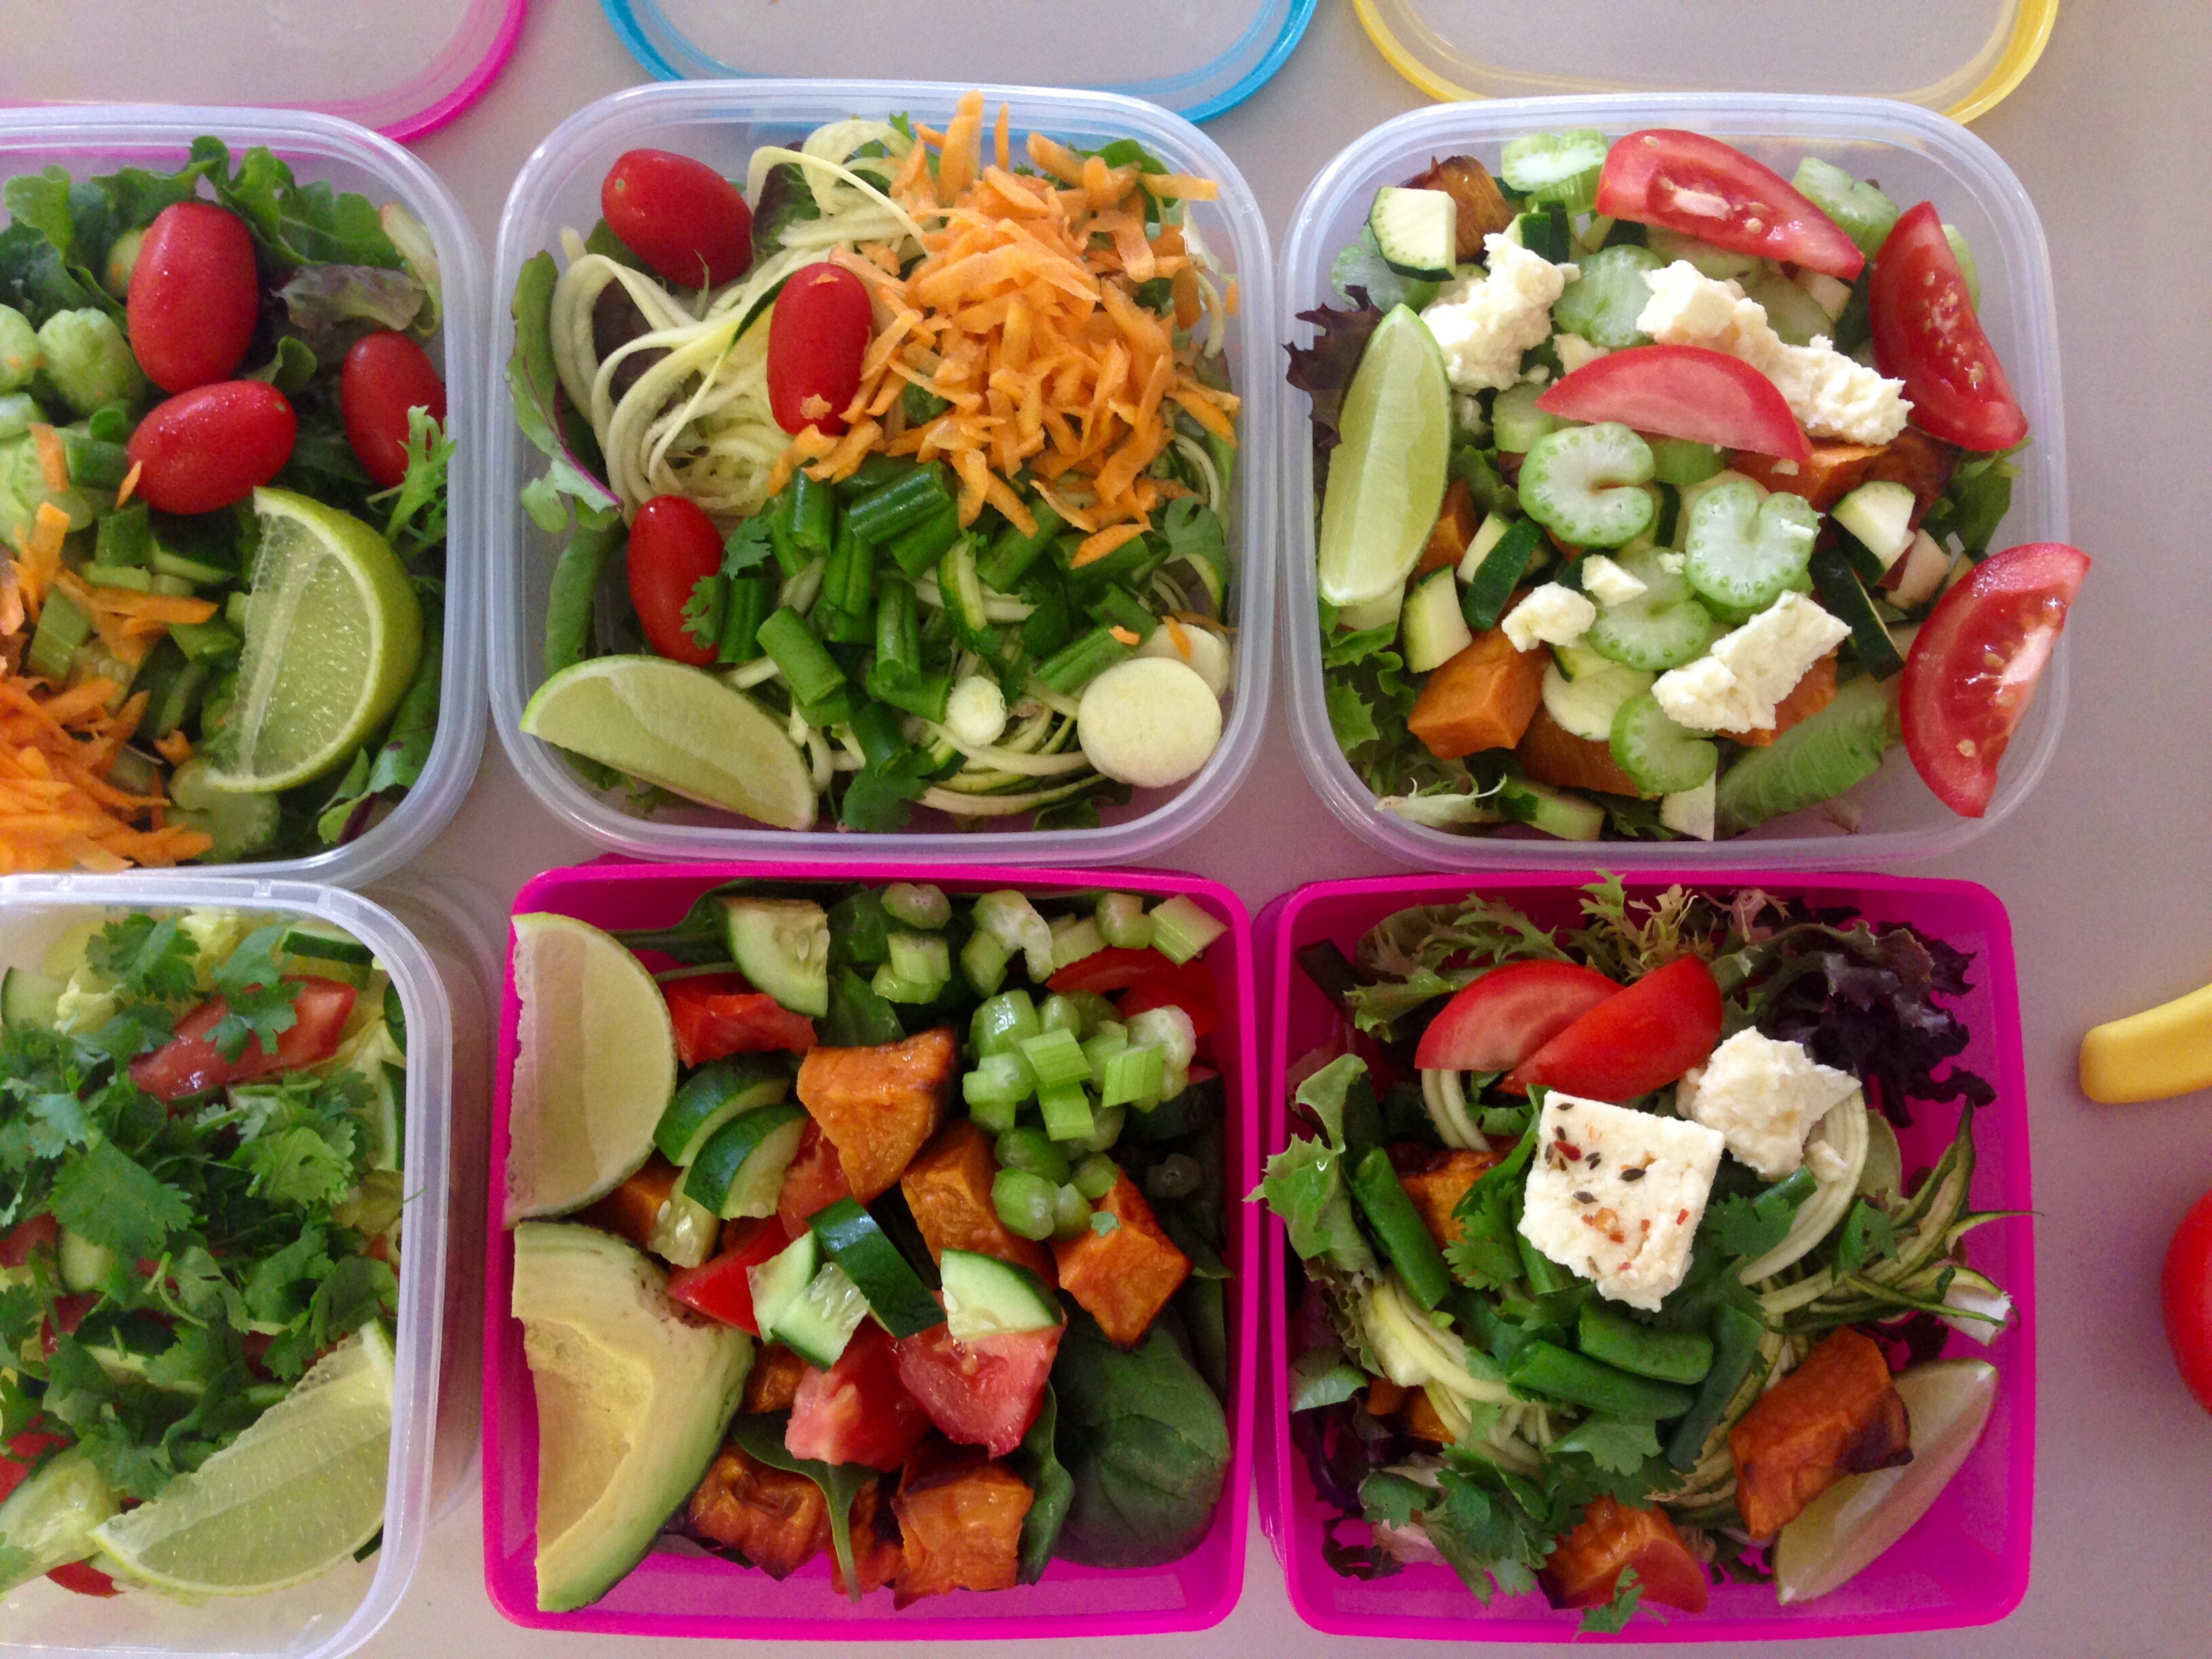 Healthy Lunch Foods To Pack - Best Design Idea